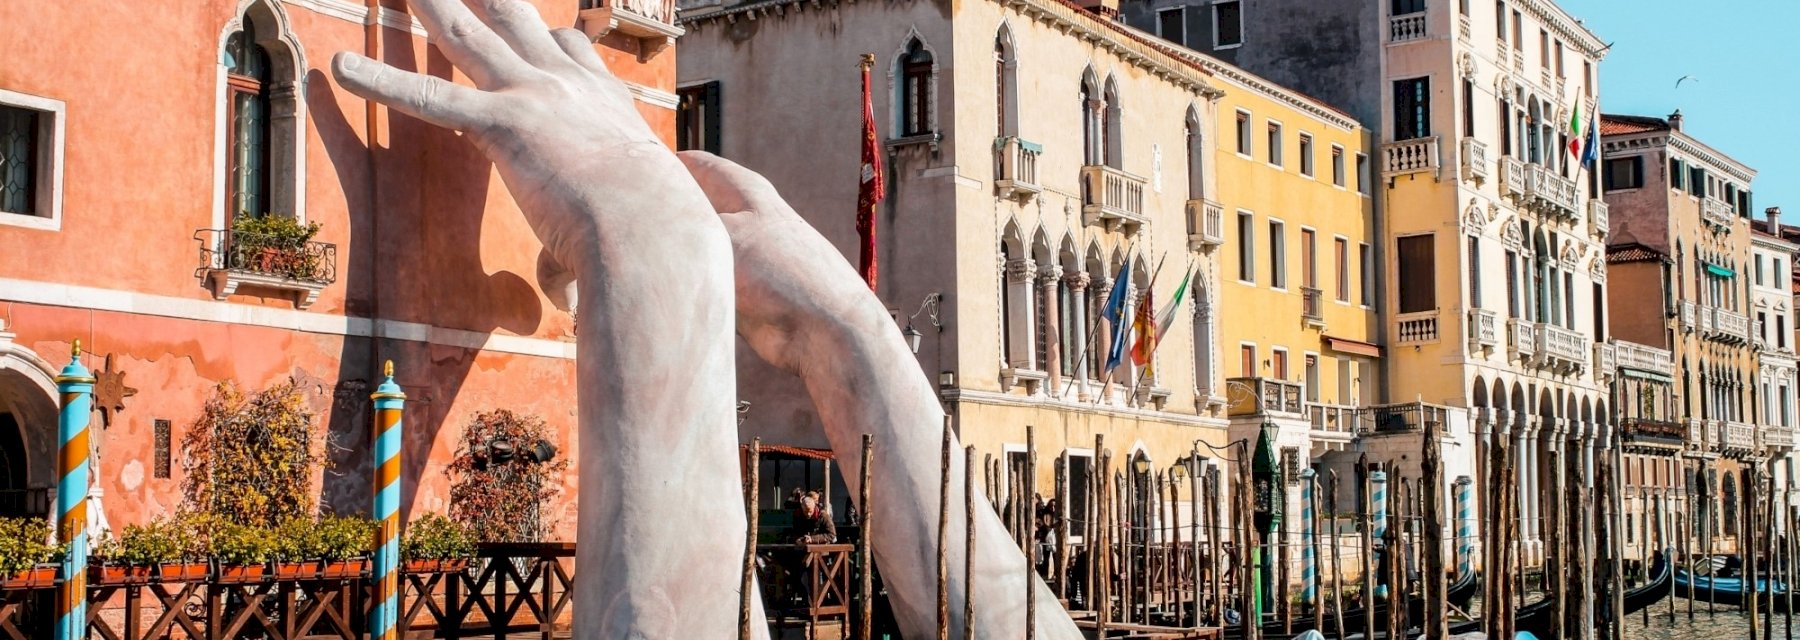 The history of the Venice Biennale